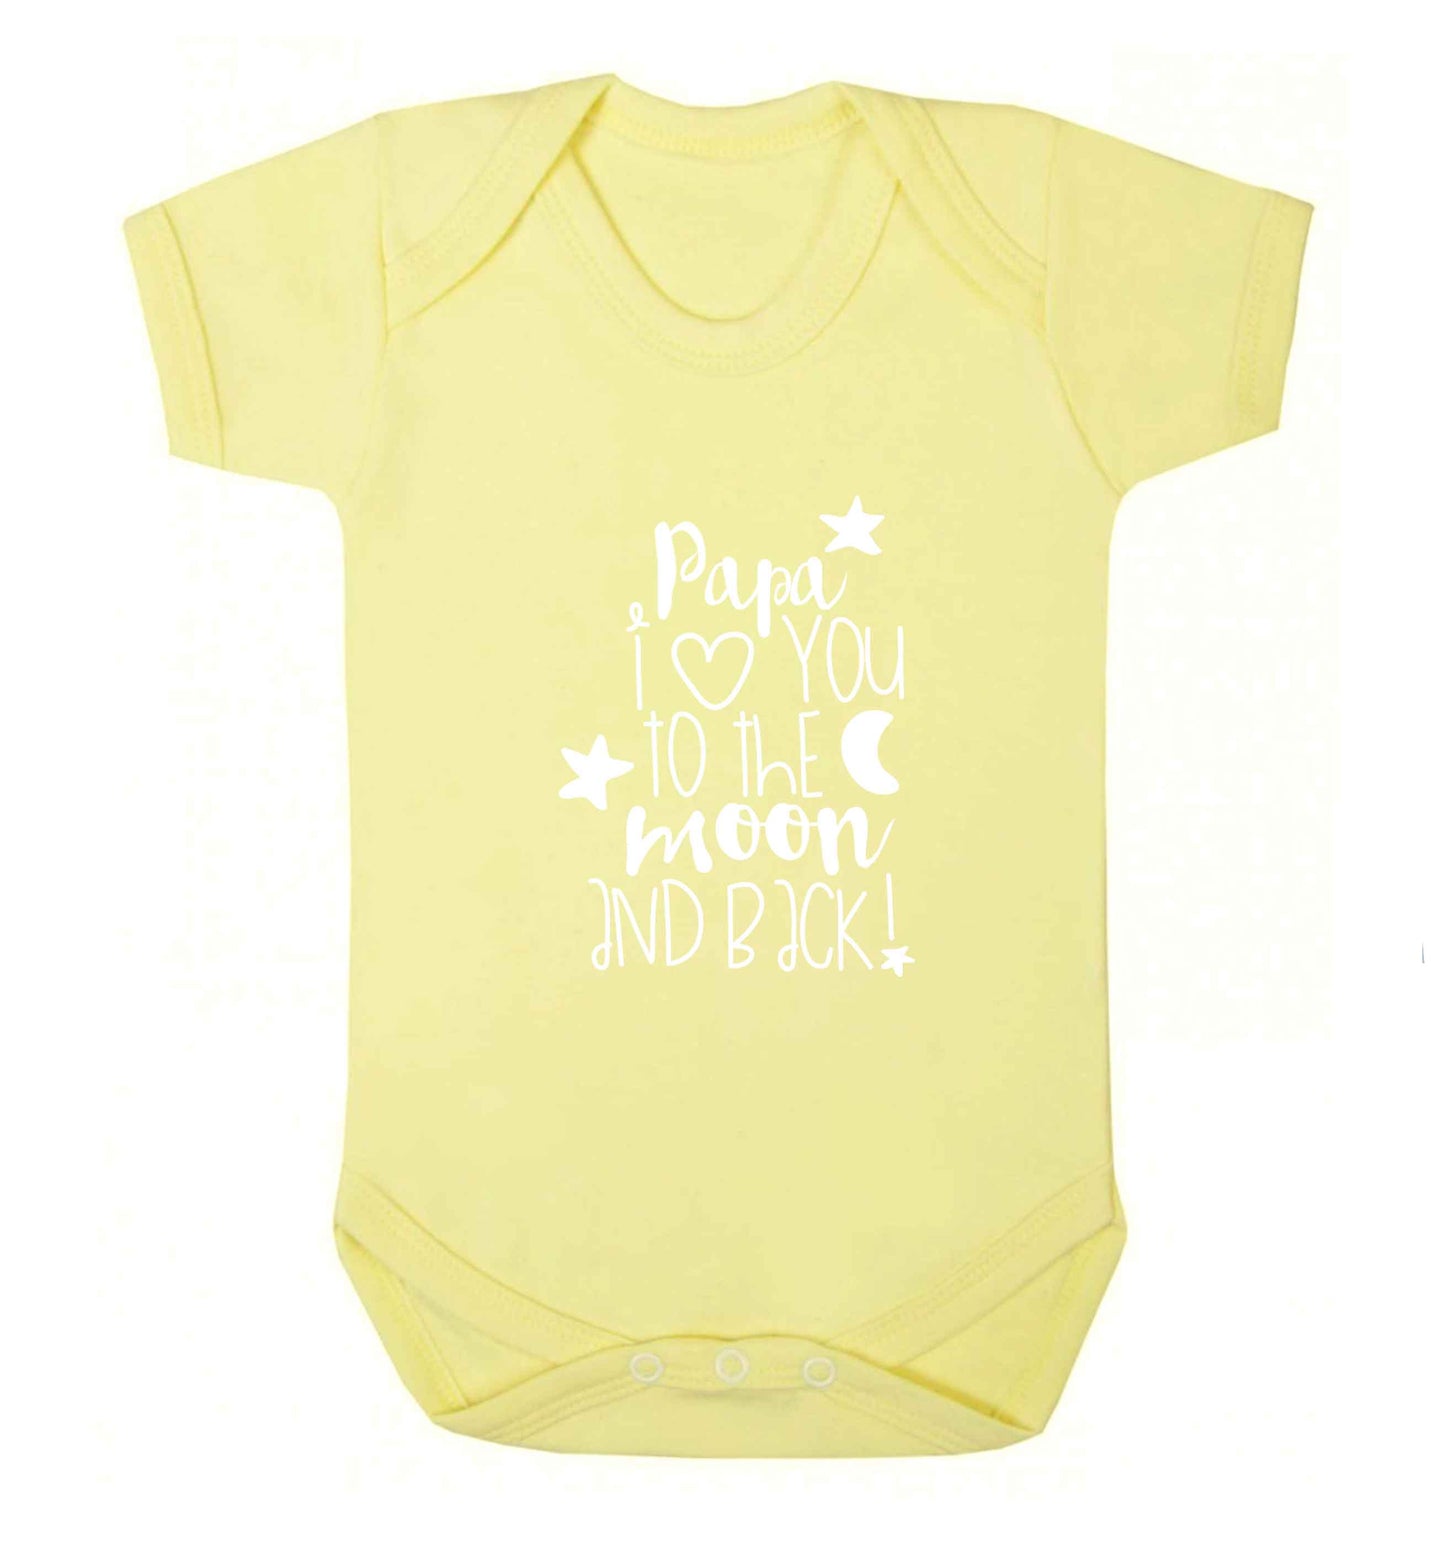 Papa I love you to the moon and back baby vest pale yellow 18-24 months